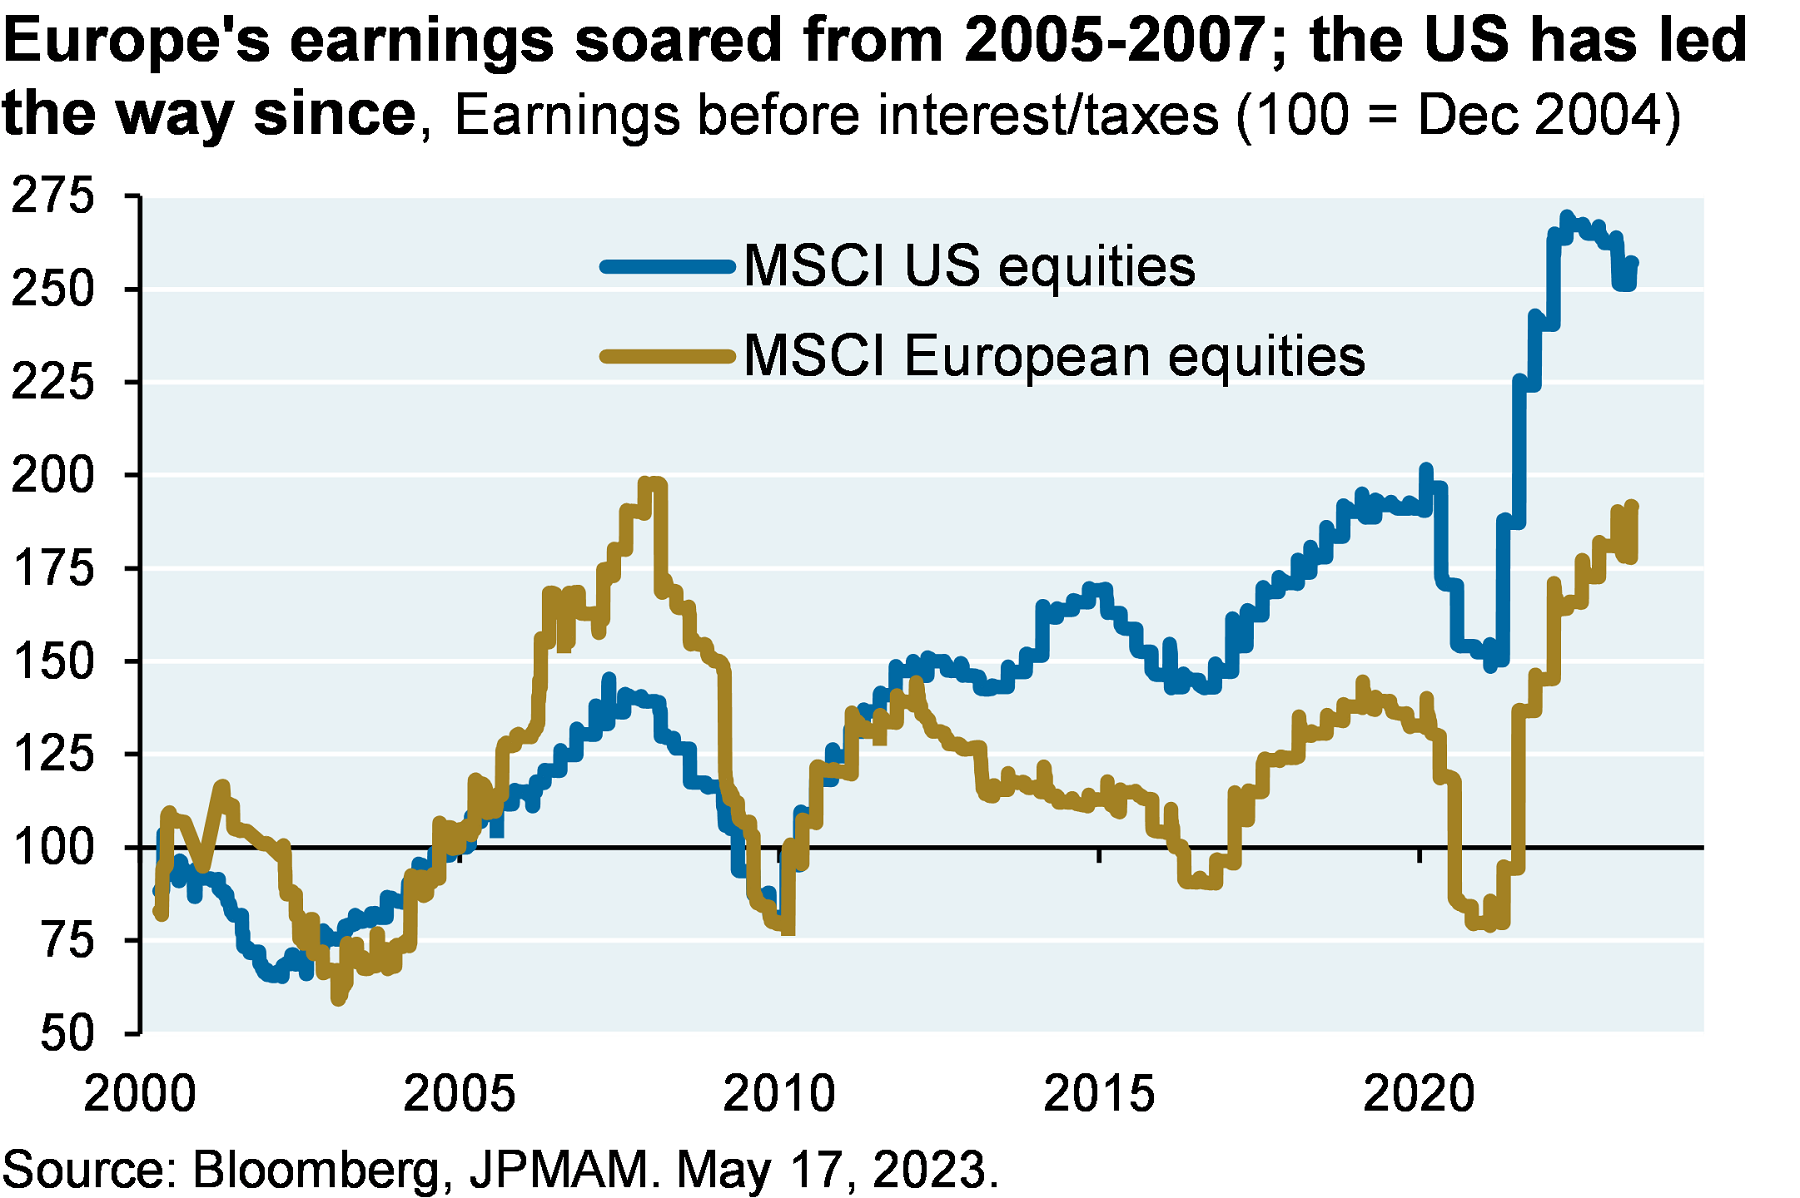 Europe's earnings soared from 2005-2007; the US has led the way since